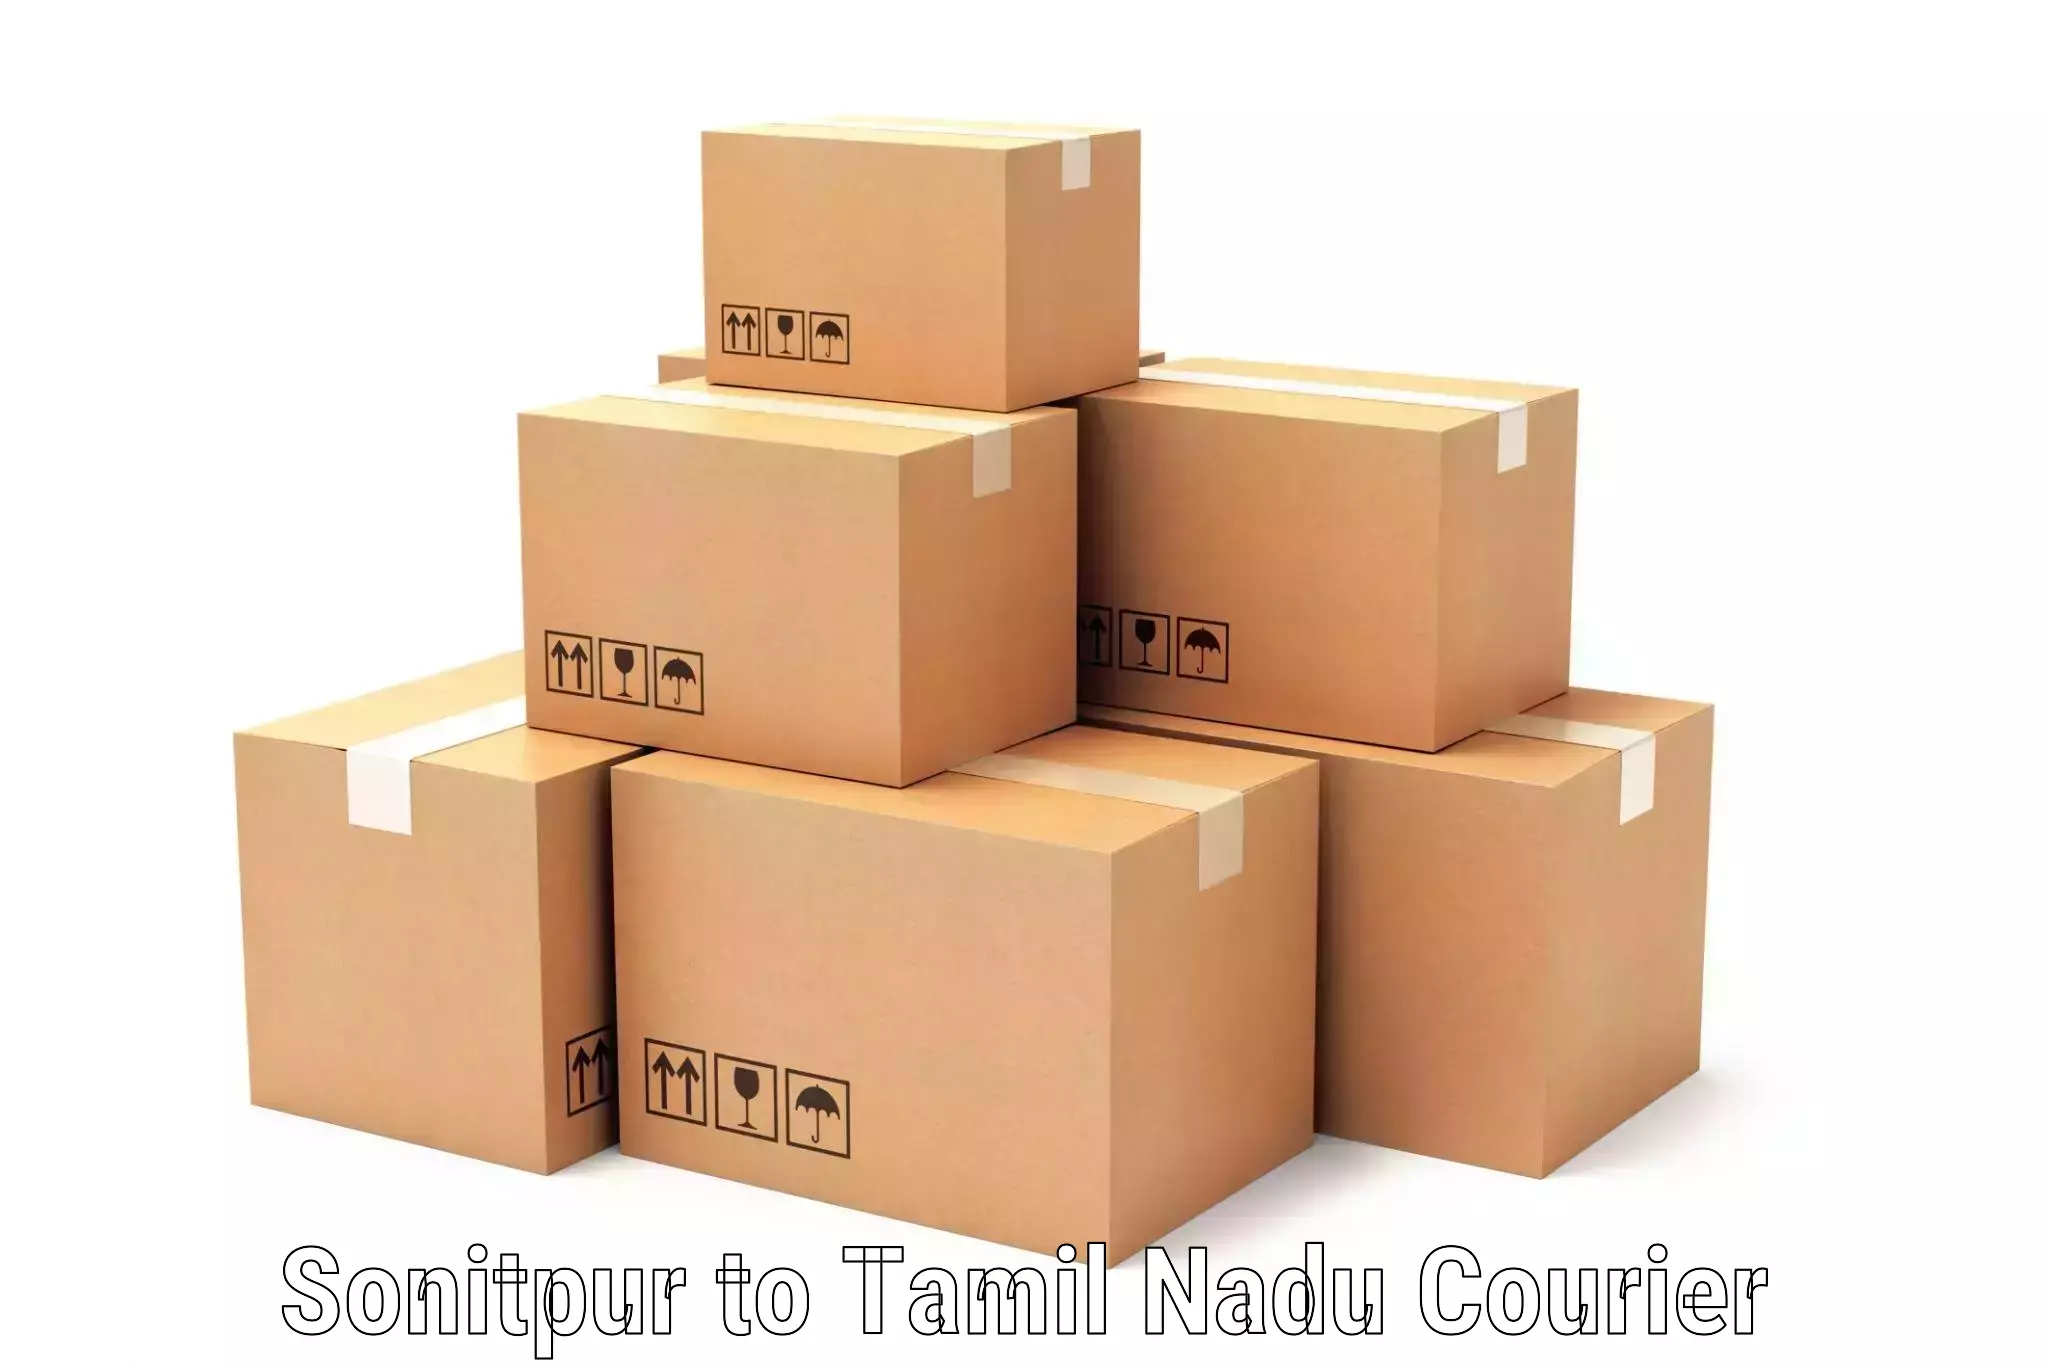 State-of-the-art courier technology in Sonitpur to Mayiladuthurai